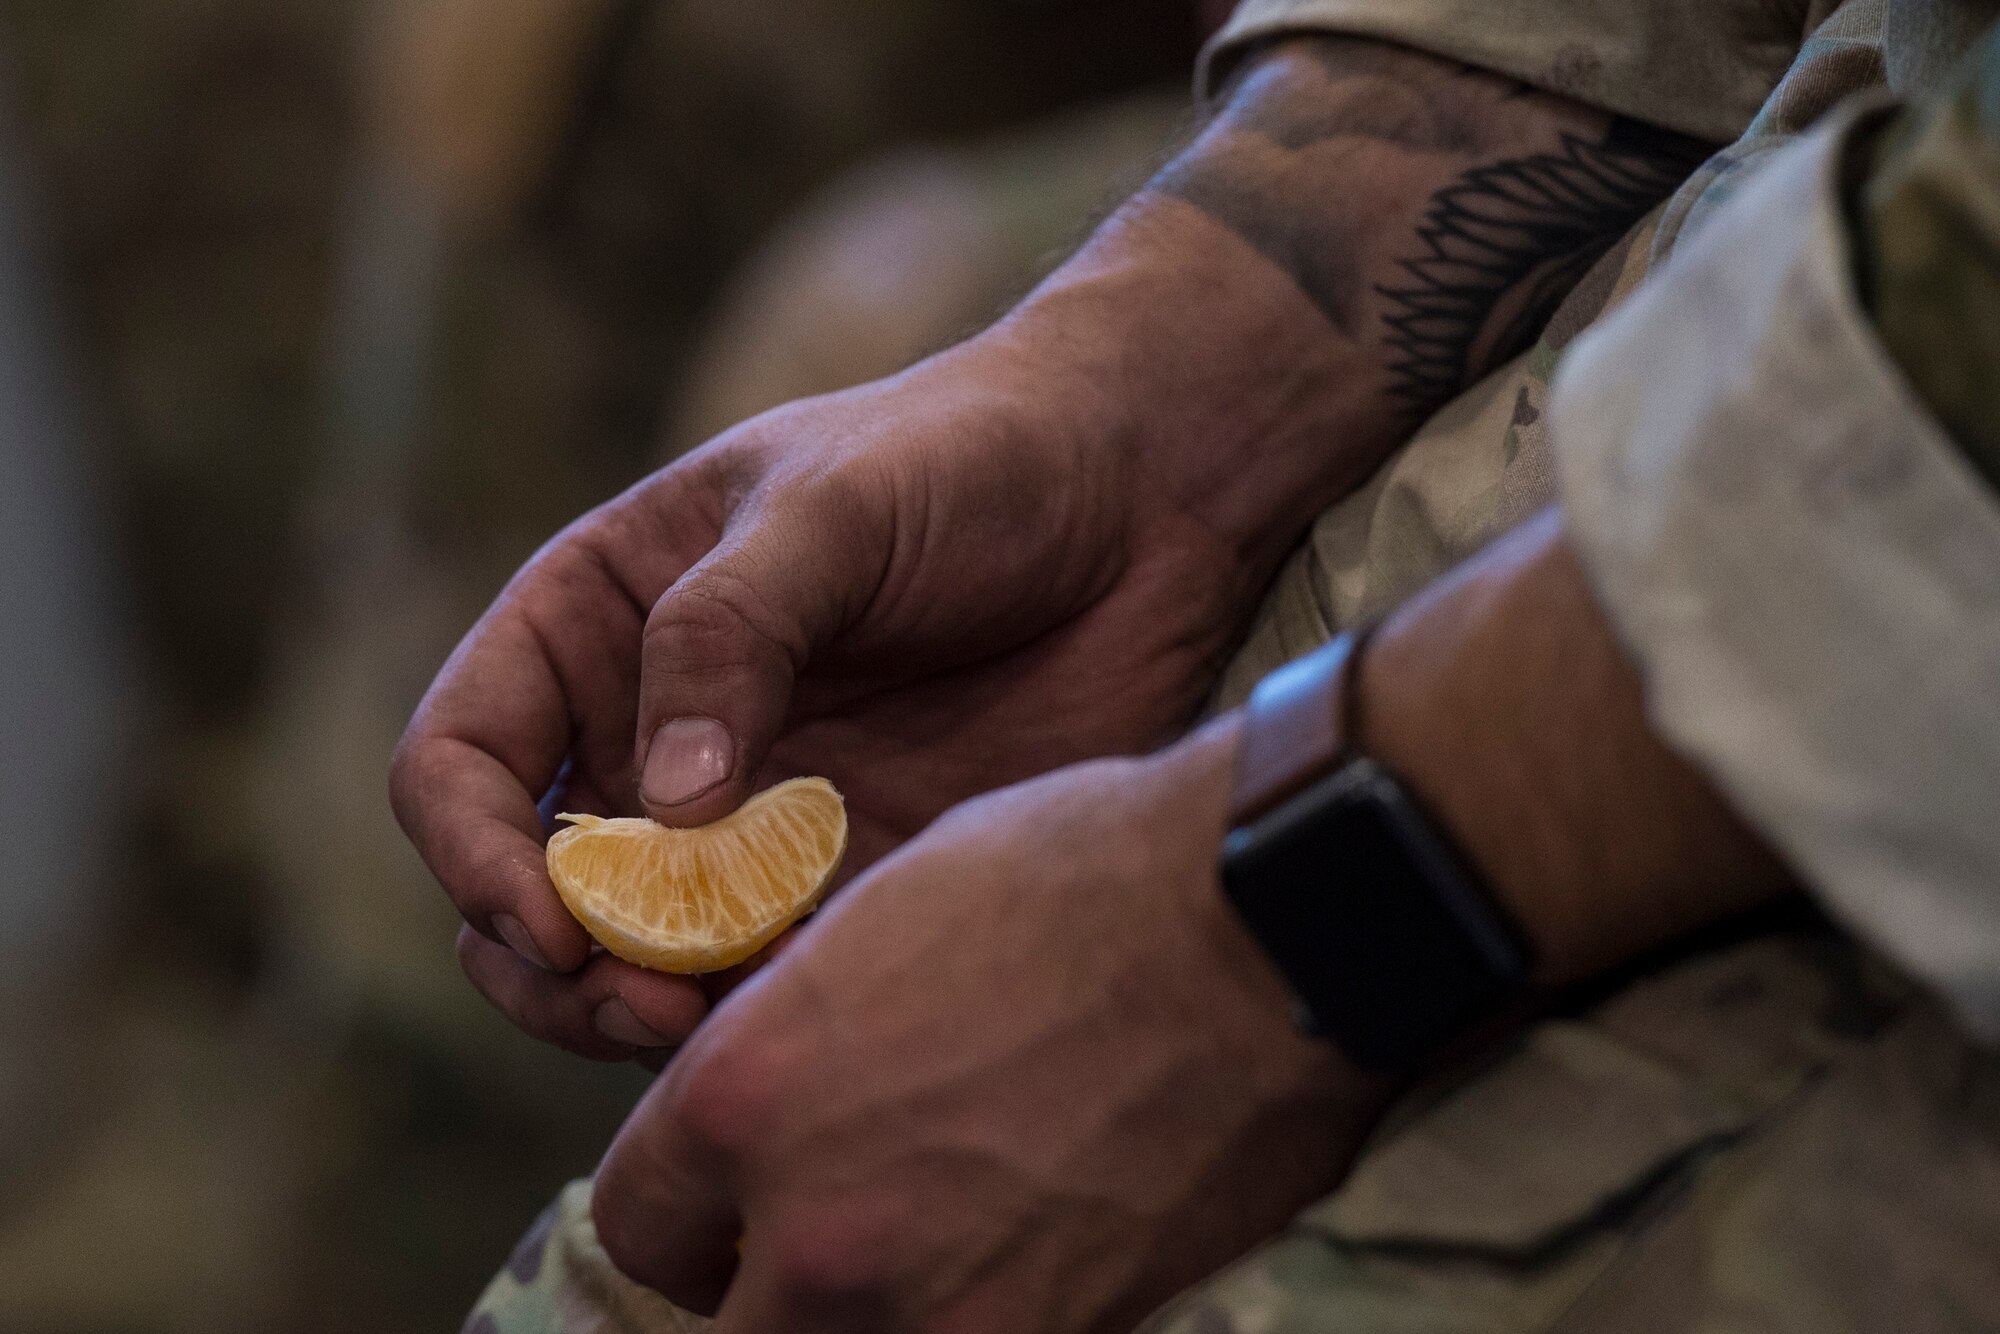 A student eats a snack during a full spectrum operator course, Aug. 27, 2018, at Smoky Hill Air National Guard Range, Kan. The course was held Aug. 26-31, and incorporated specific duties performed by tactical air control party members and security forces personnel to build on their gunfighting skills. (U.S. Air Force photo by Senior Airman Janiqua P. Robinson)